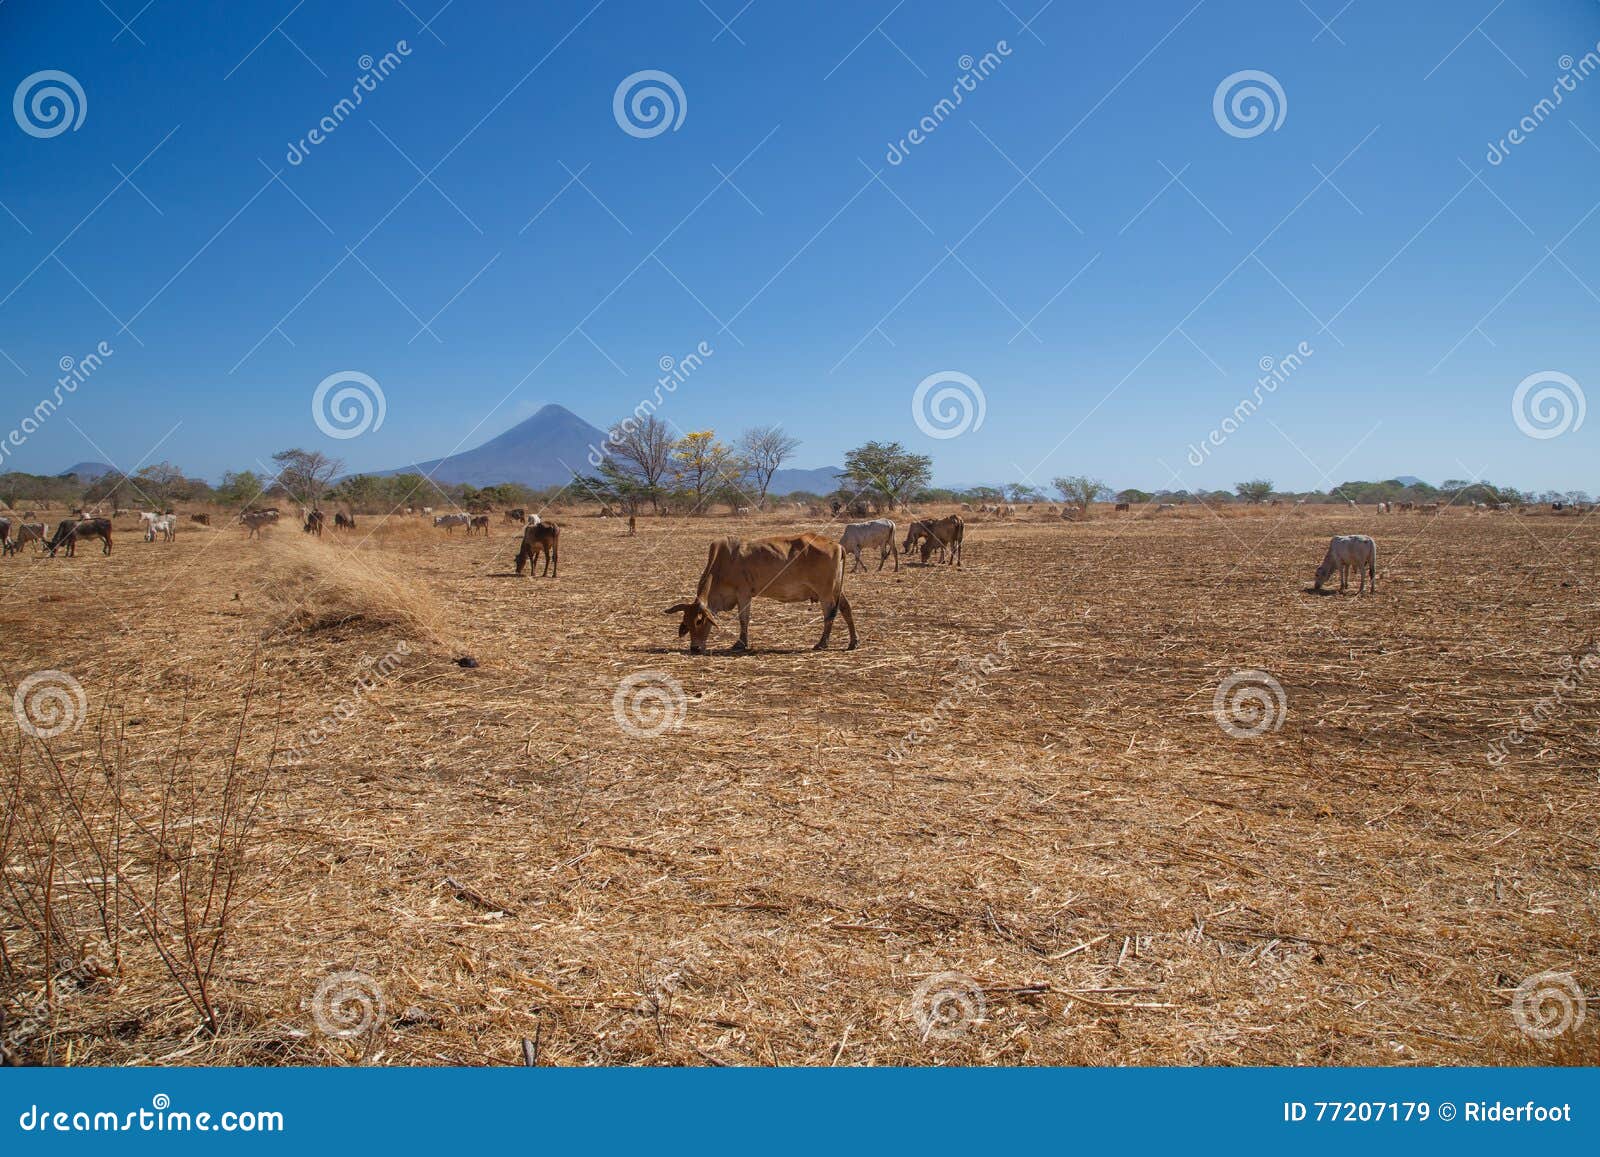 field and cows during summer in nicaragua